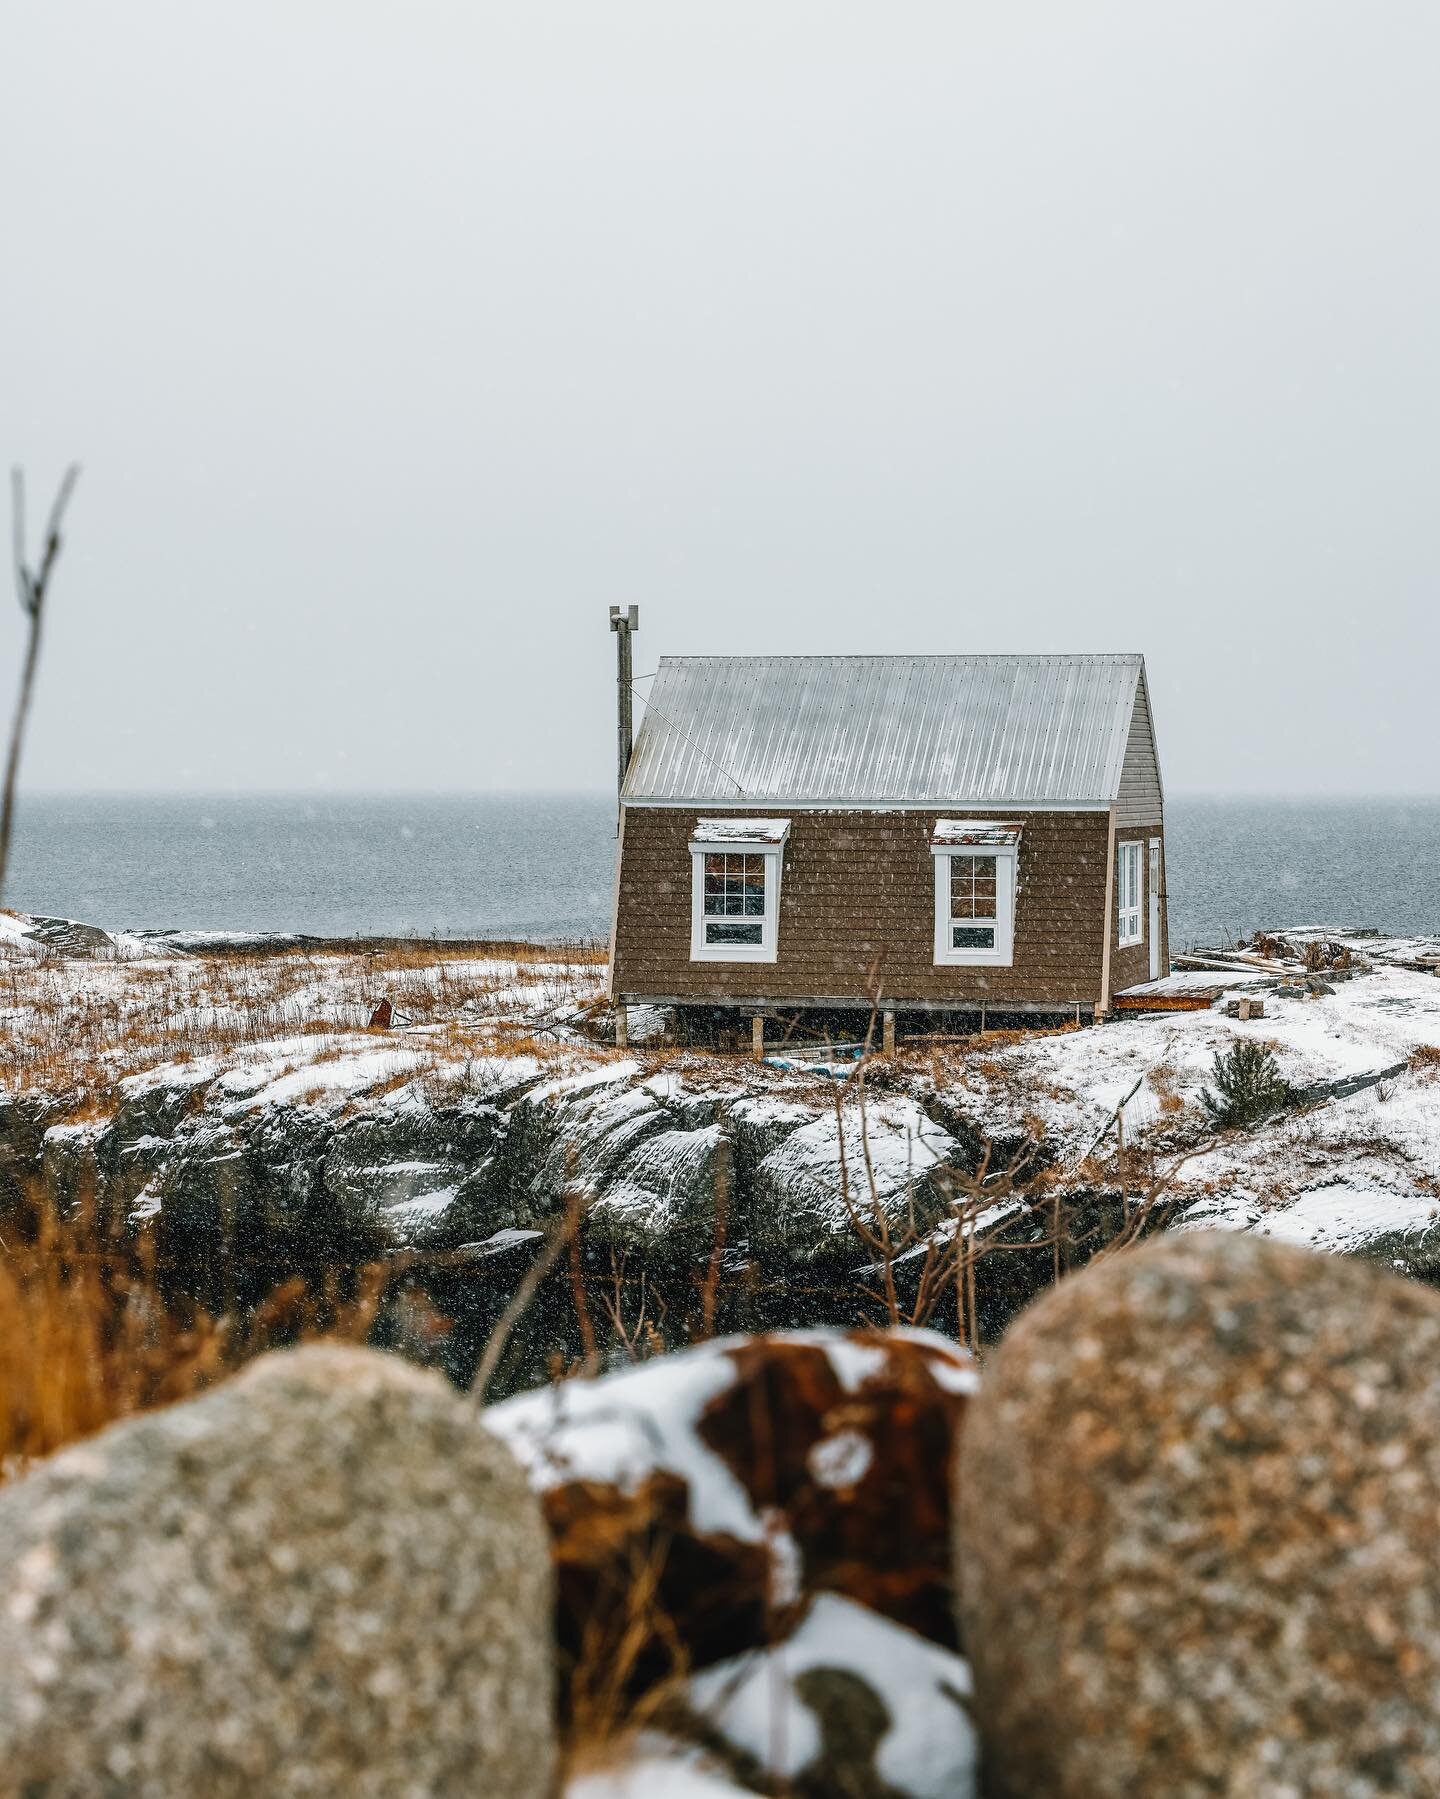 Blue Rocks, NS
&bull; Since everything else is an Airbnb at this point, can we at least have this one be?